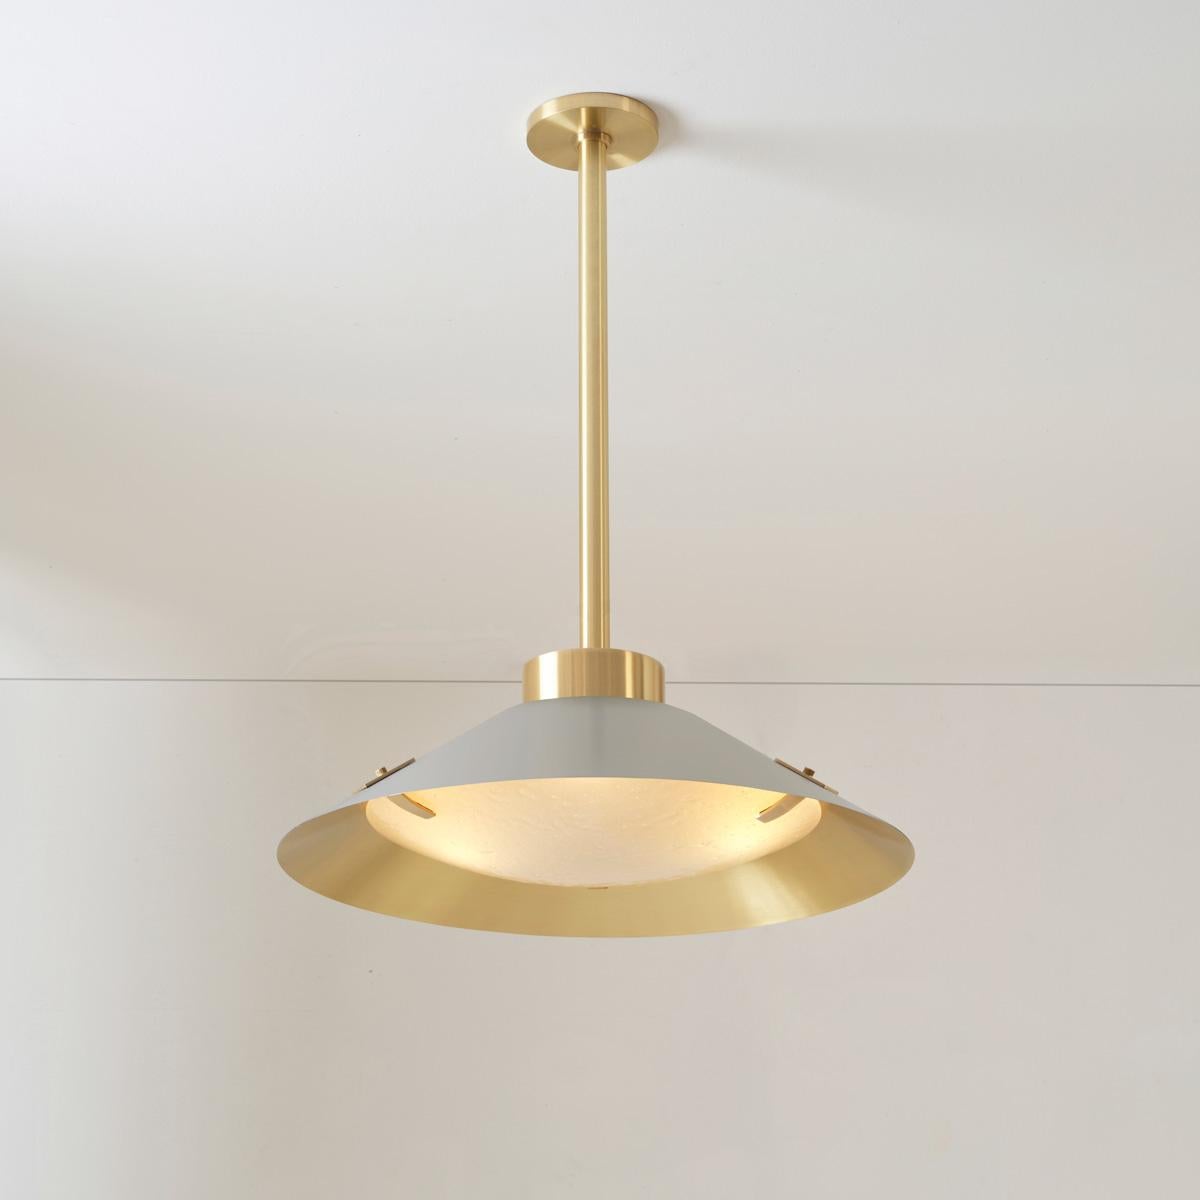 The Kono ceiling light is inspired by time tested shapes and lines but has a touch of organic modern via the incorporation of our signature Murano Bubble glass. With a mix of classic and contemporary, a two-tone shade with many color combinations